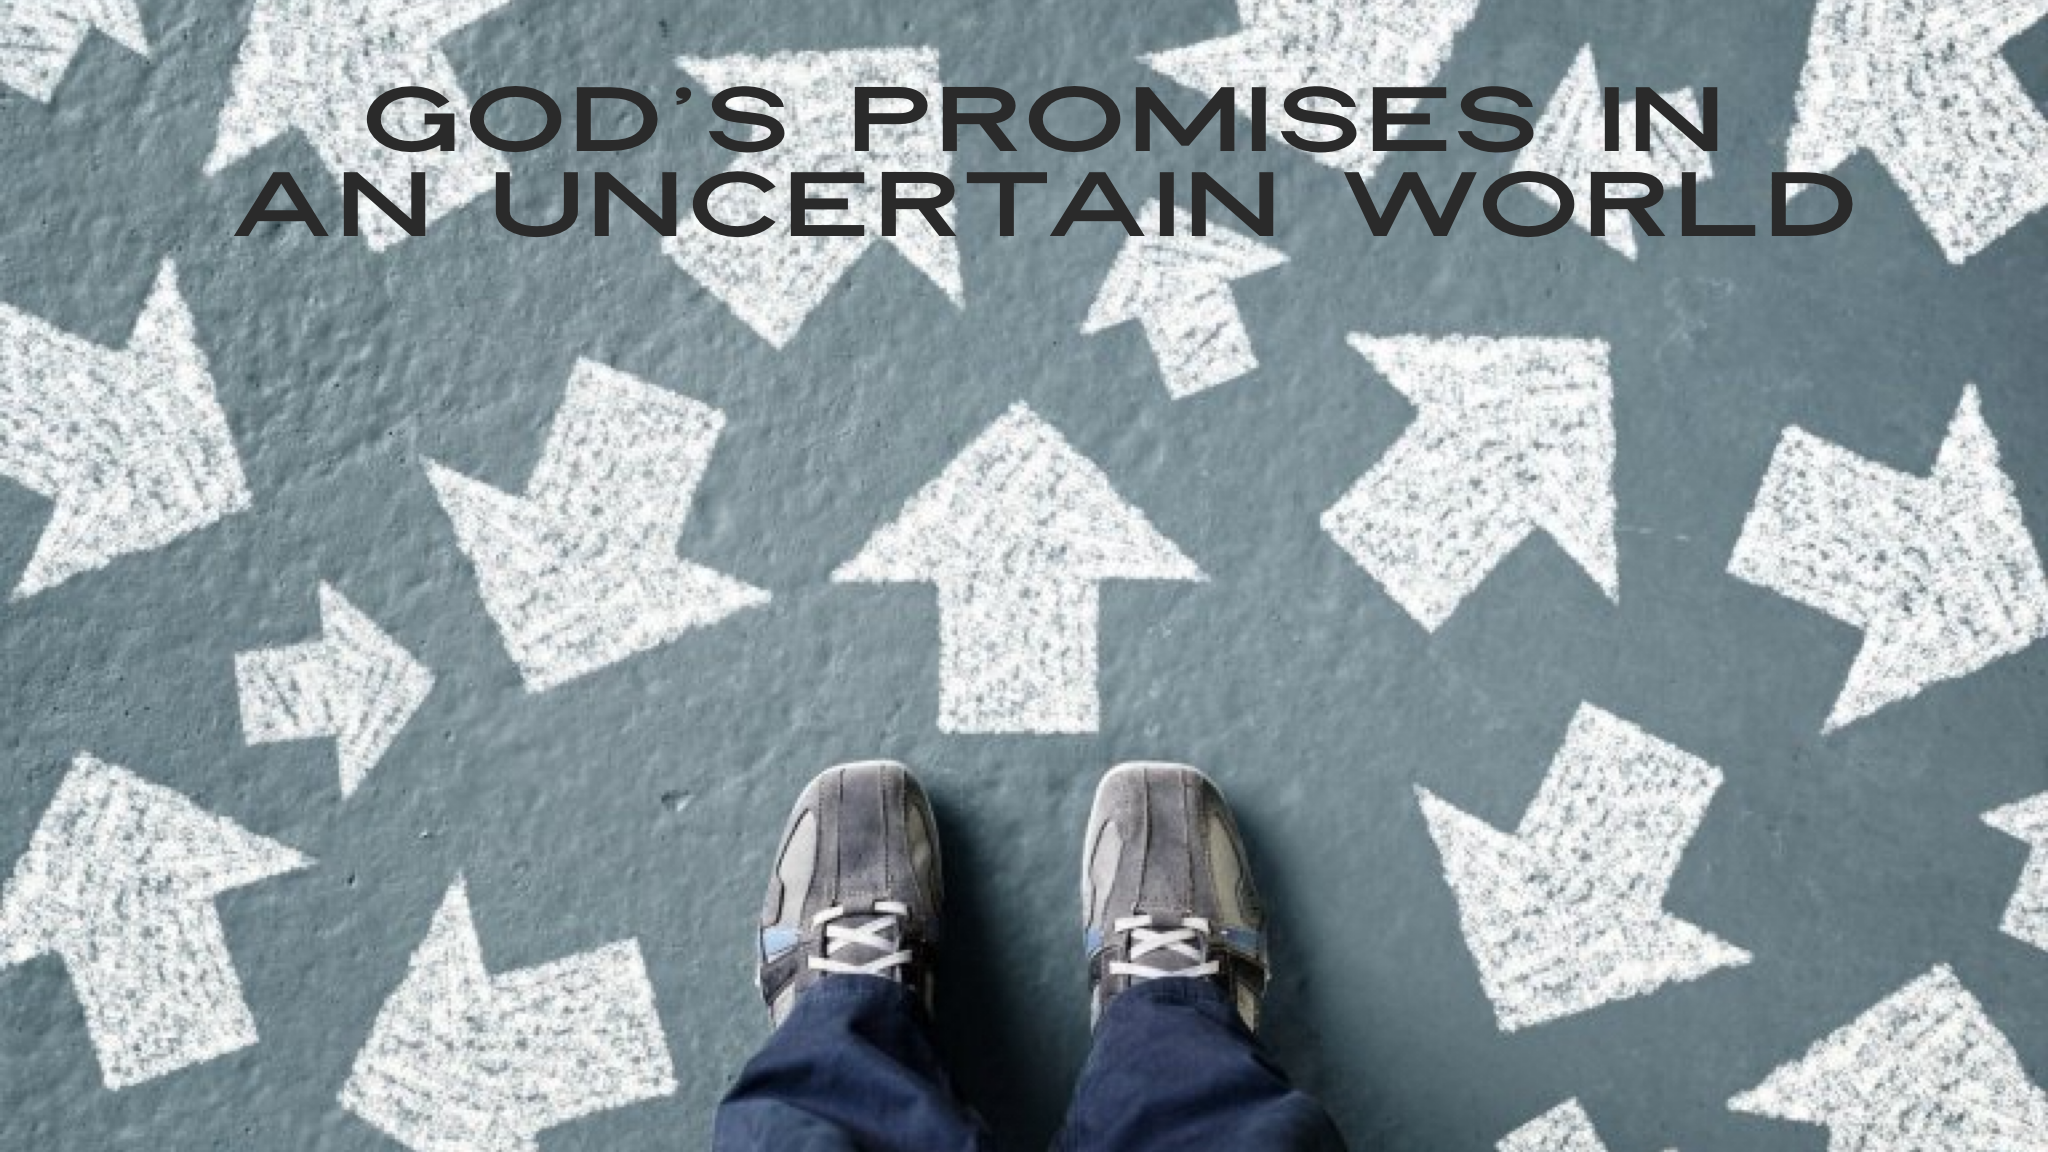 God's Promises in an Uncertain World: I will be with you